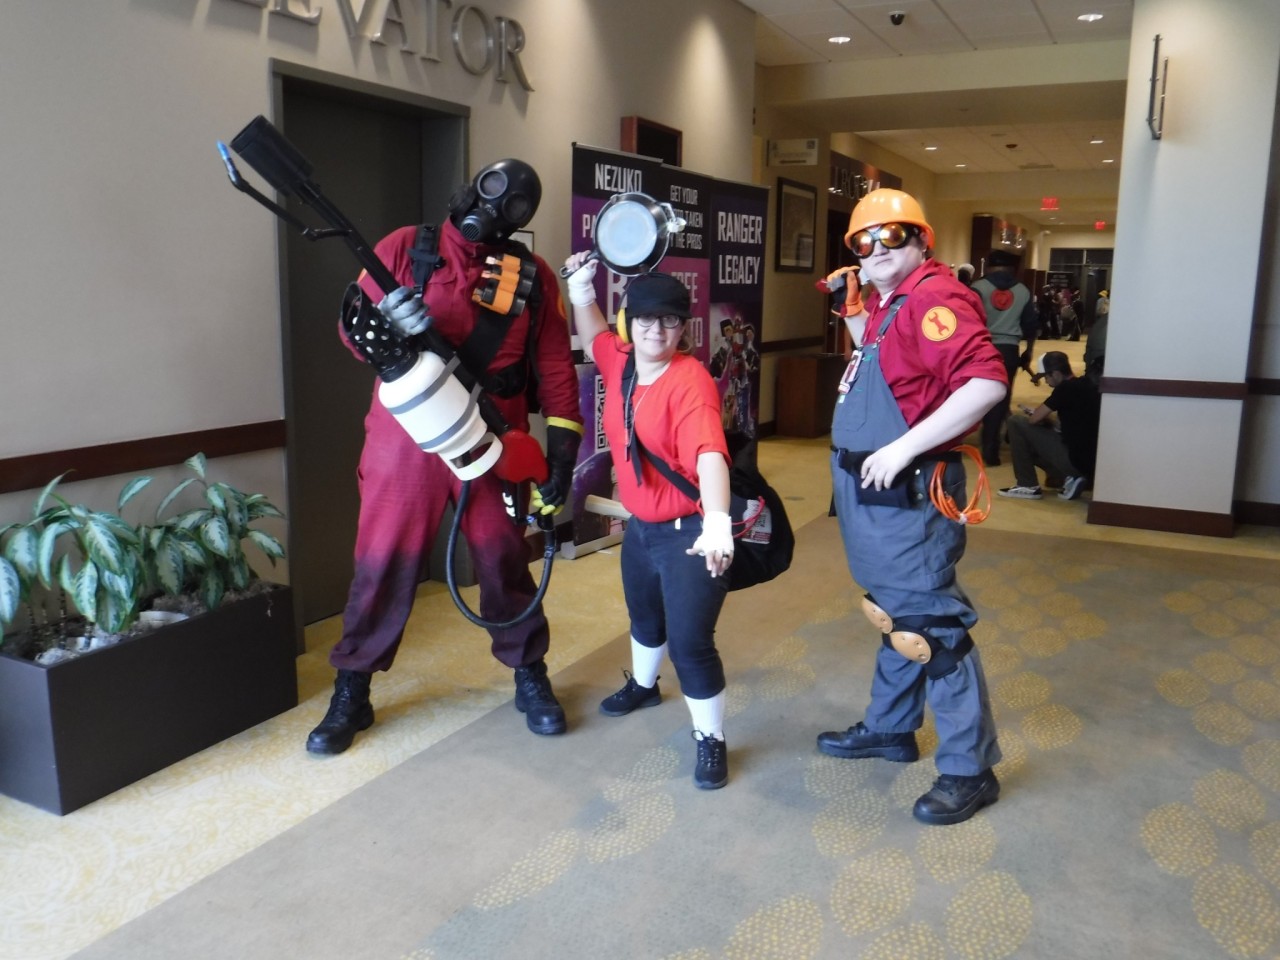 Details more than 55 anime riverside convention 2022 latest - in.cdgdbentre